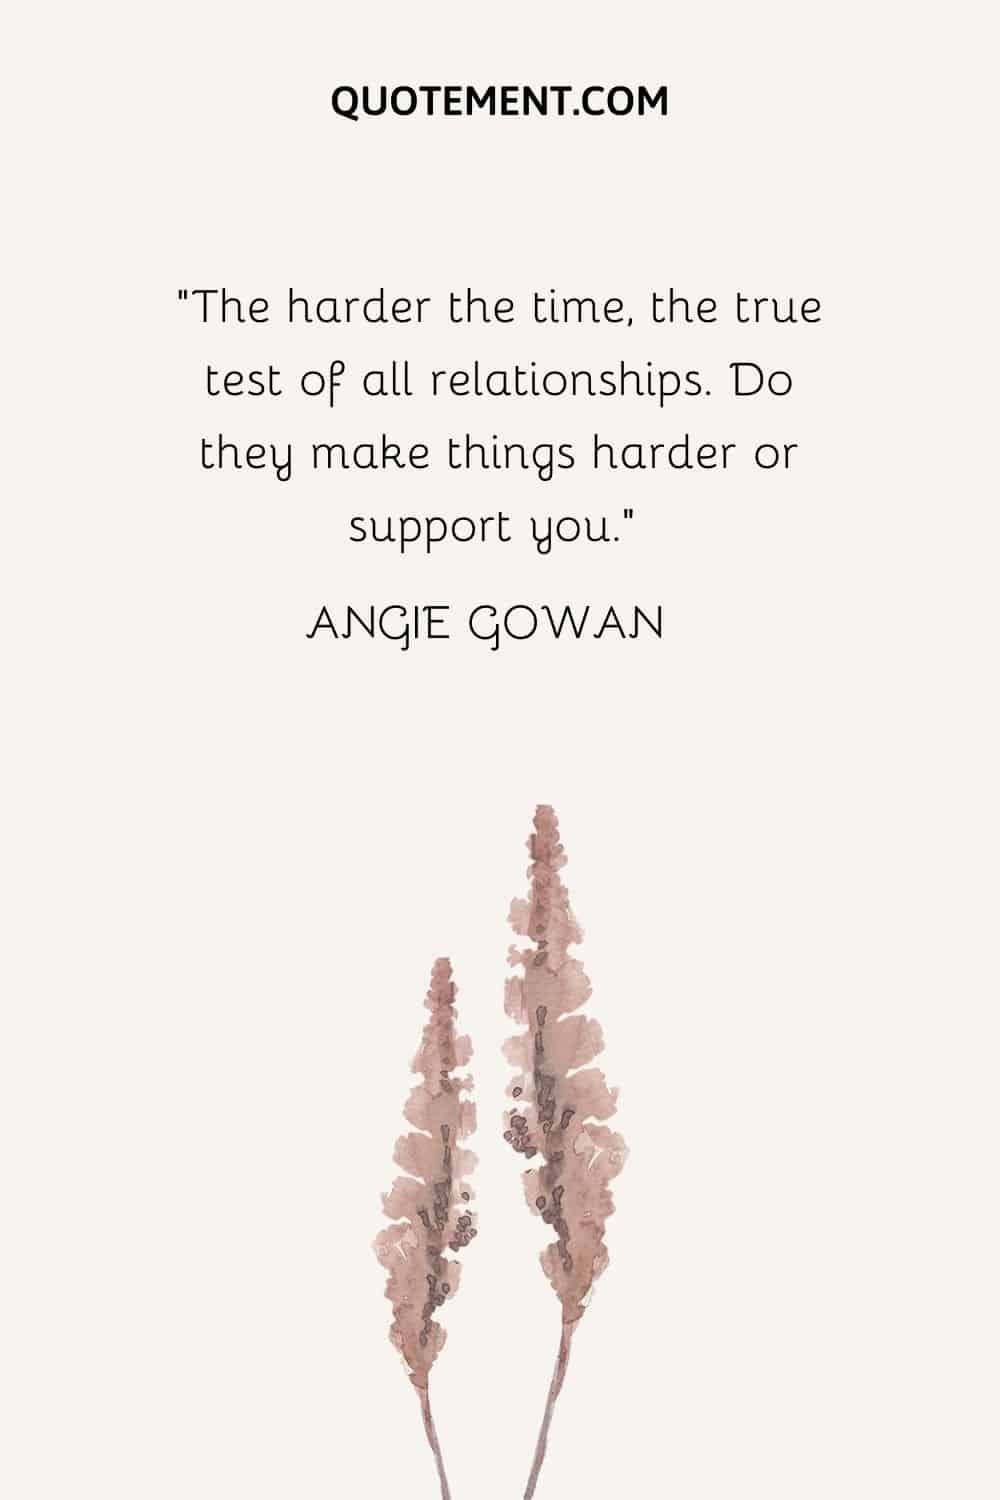 The harder the time, the true test of all relationships. Do they make things harder or support you. — Angie Gowan